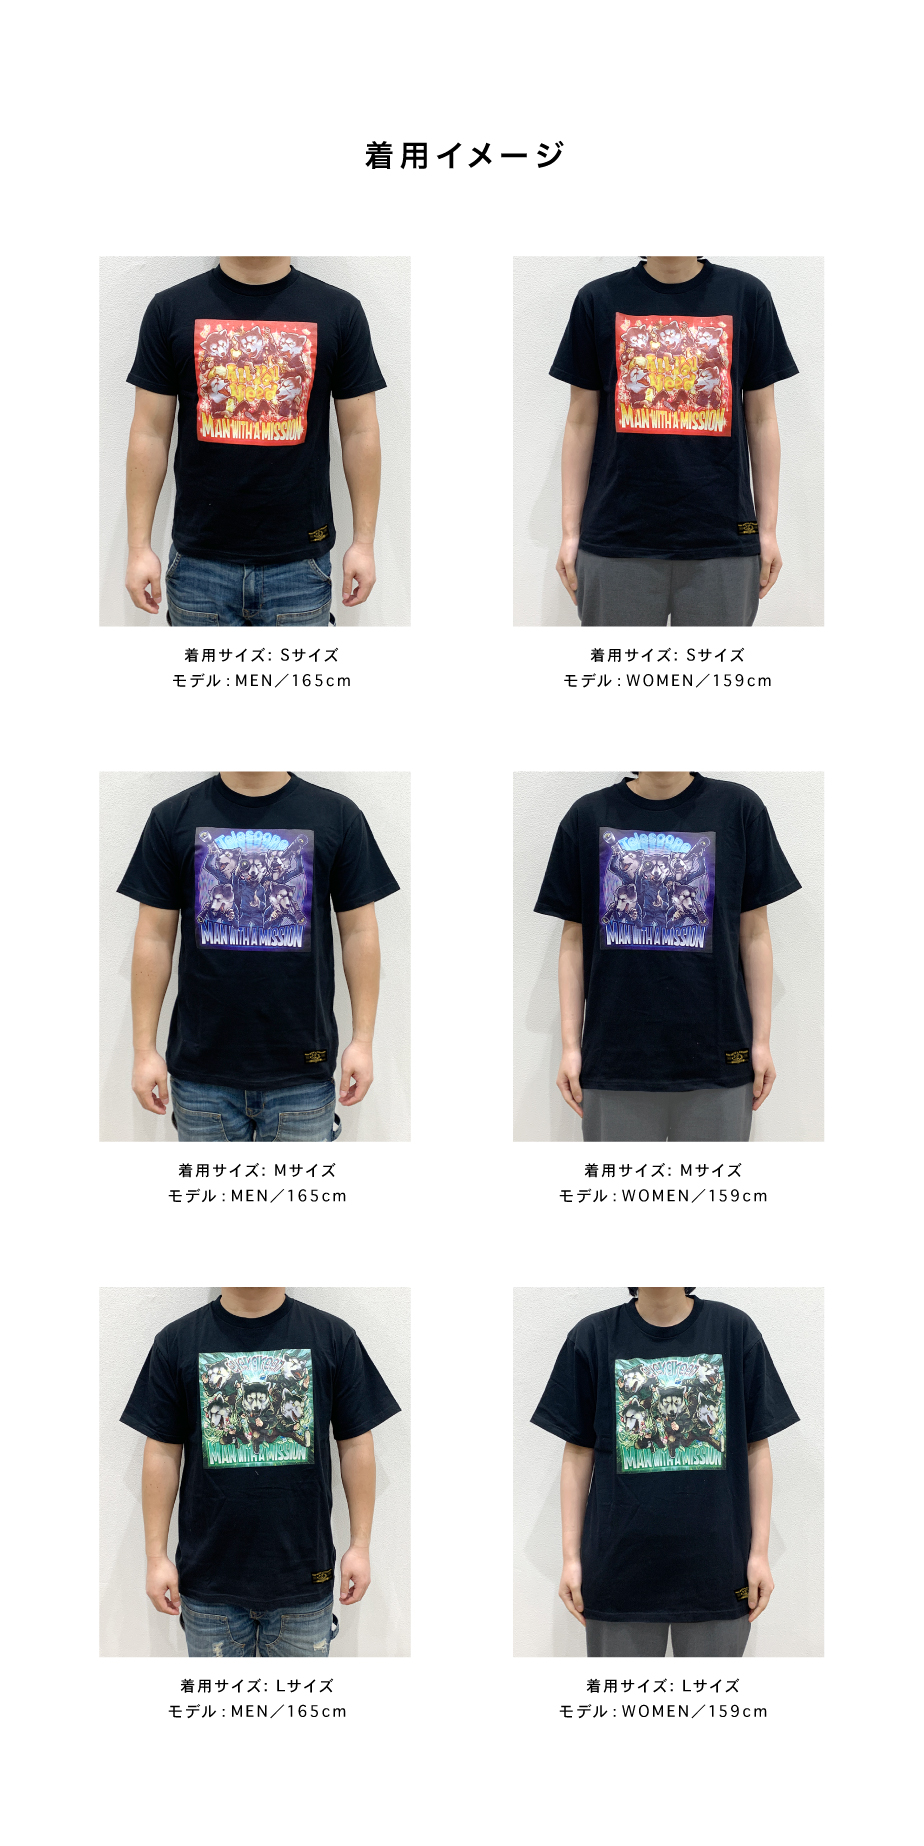 MAN WITH A MISSION Tシャツ　サイズS